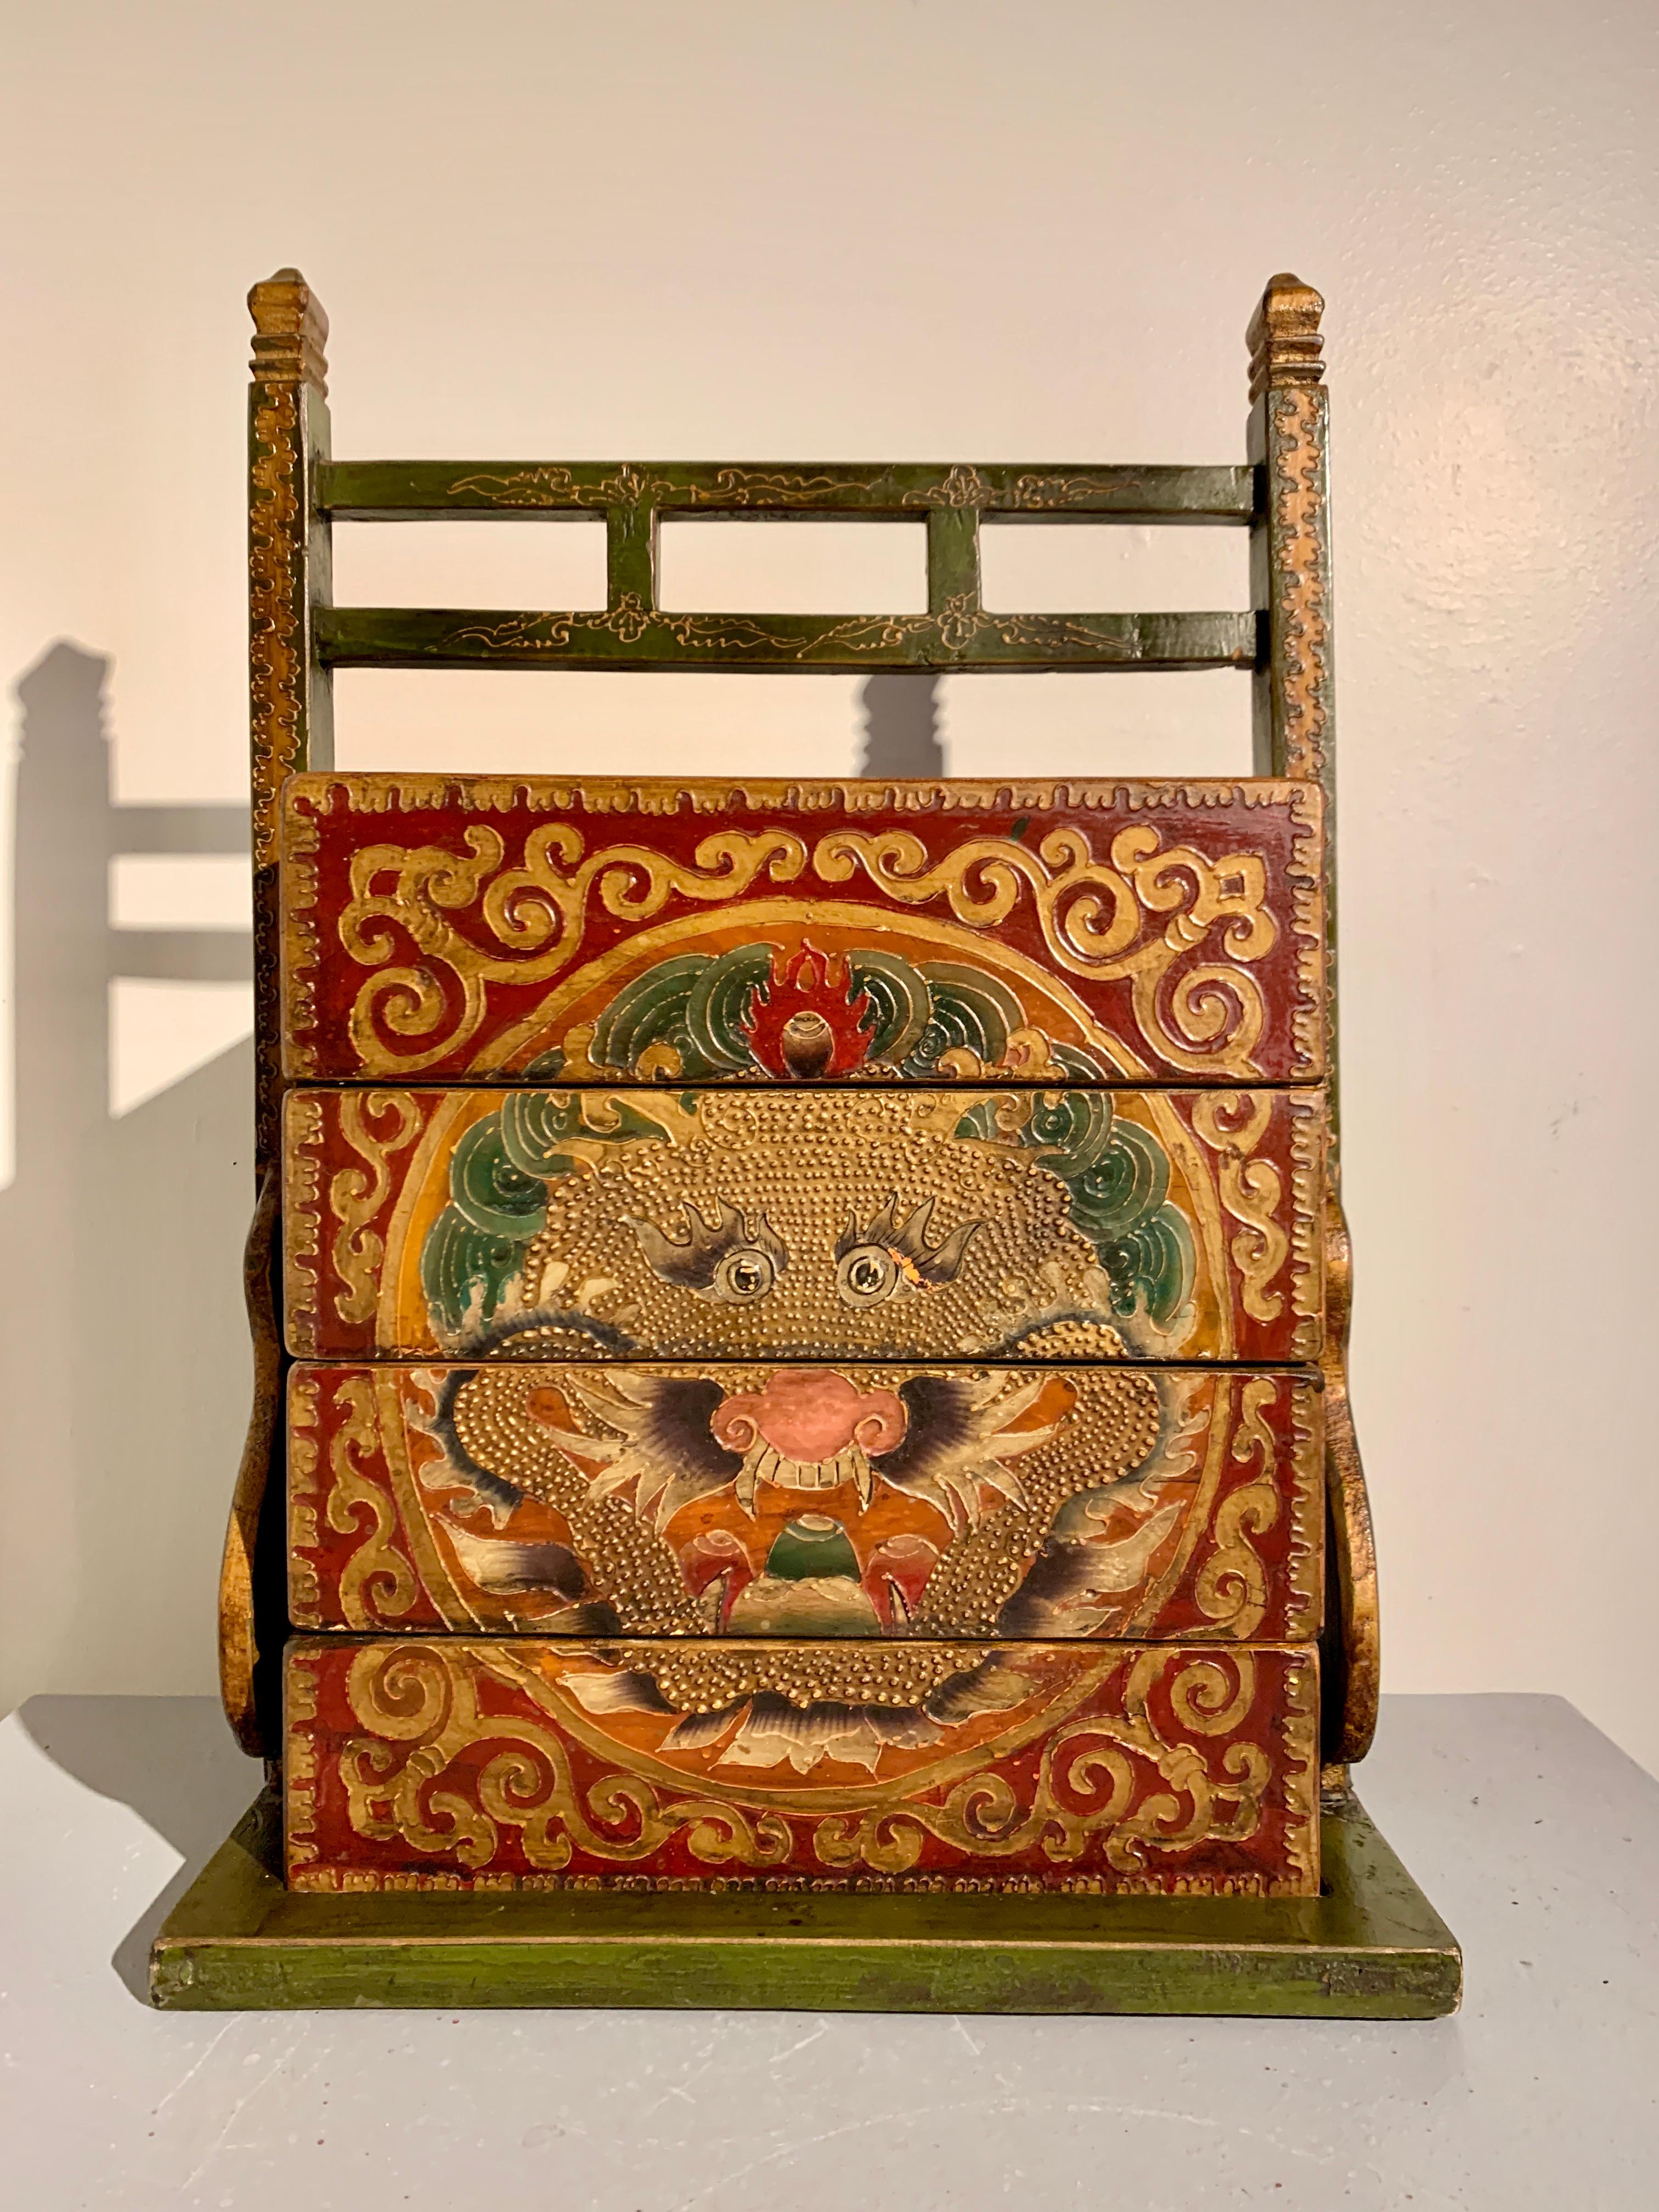 A highly decorative vintage Chinese red painted stacking picnic box and carrier, painted in the Tibetan style, circa 1990's, China.

The large painted and textured wood picnic box and carrier comprised of three trays or boxes, and one lid, all